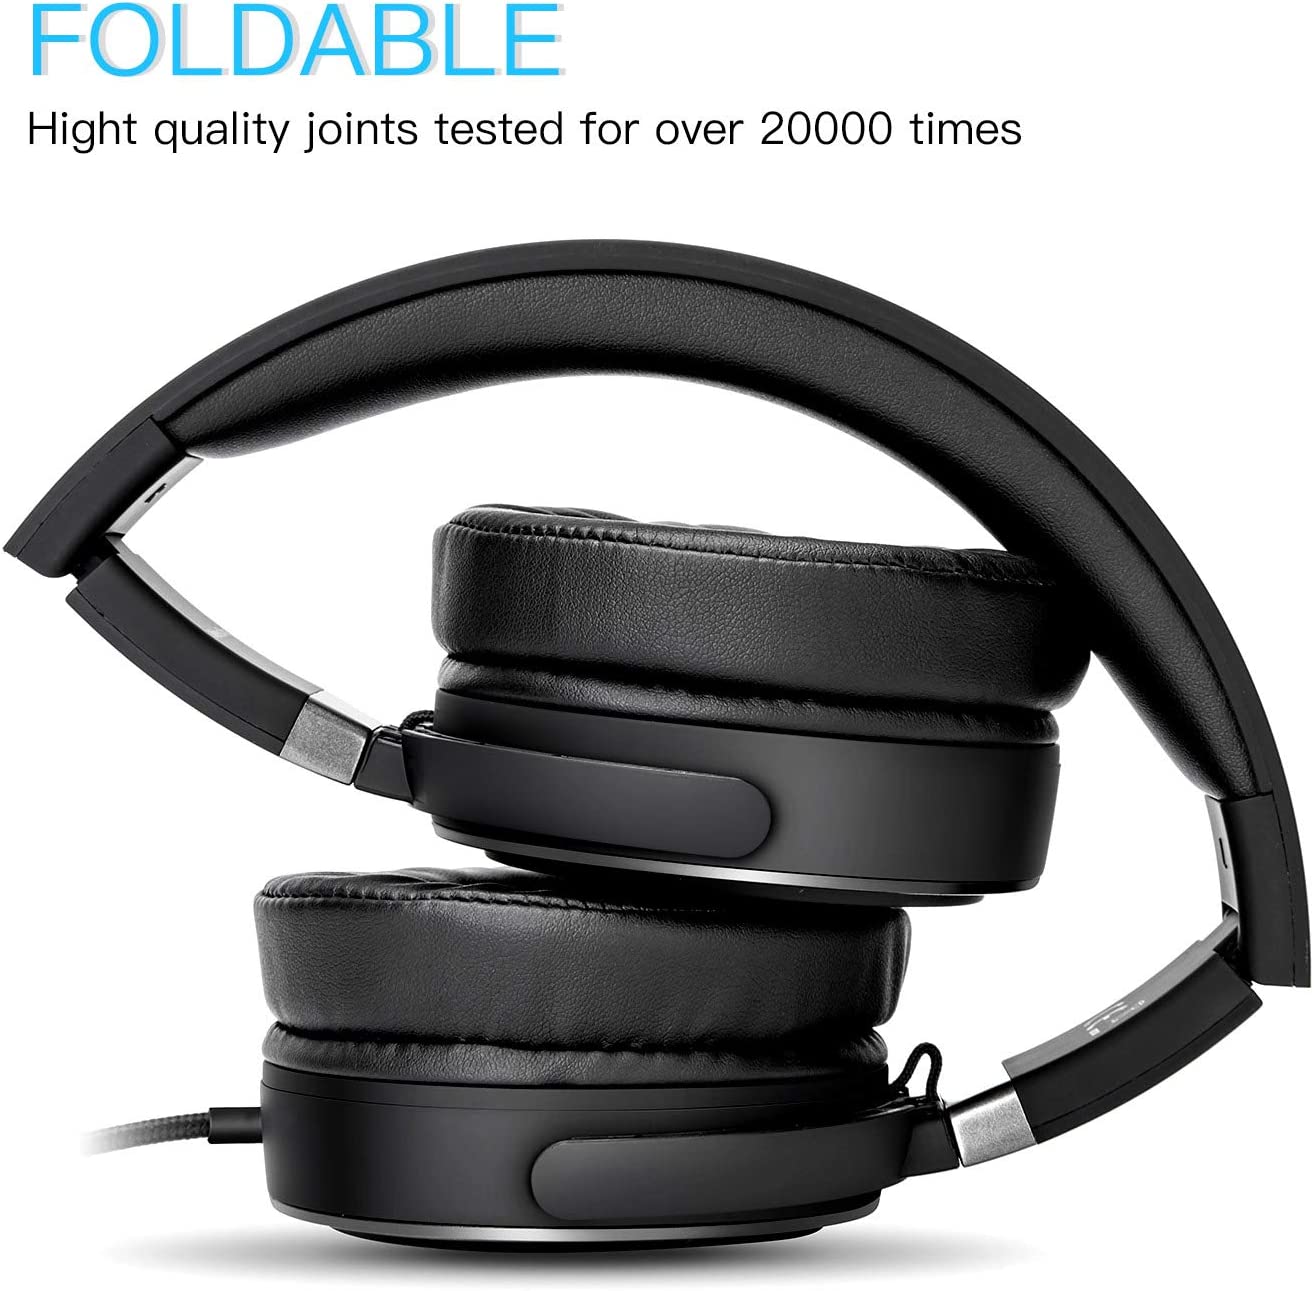 Rockpapa Circle One Folding Headphones Wired with Mic & Soft Earpad